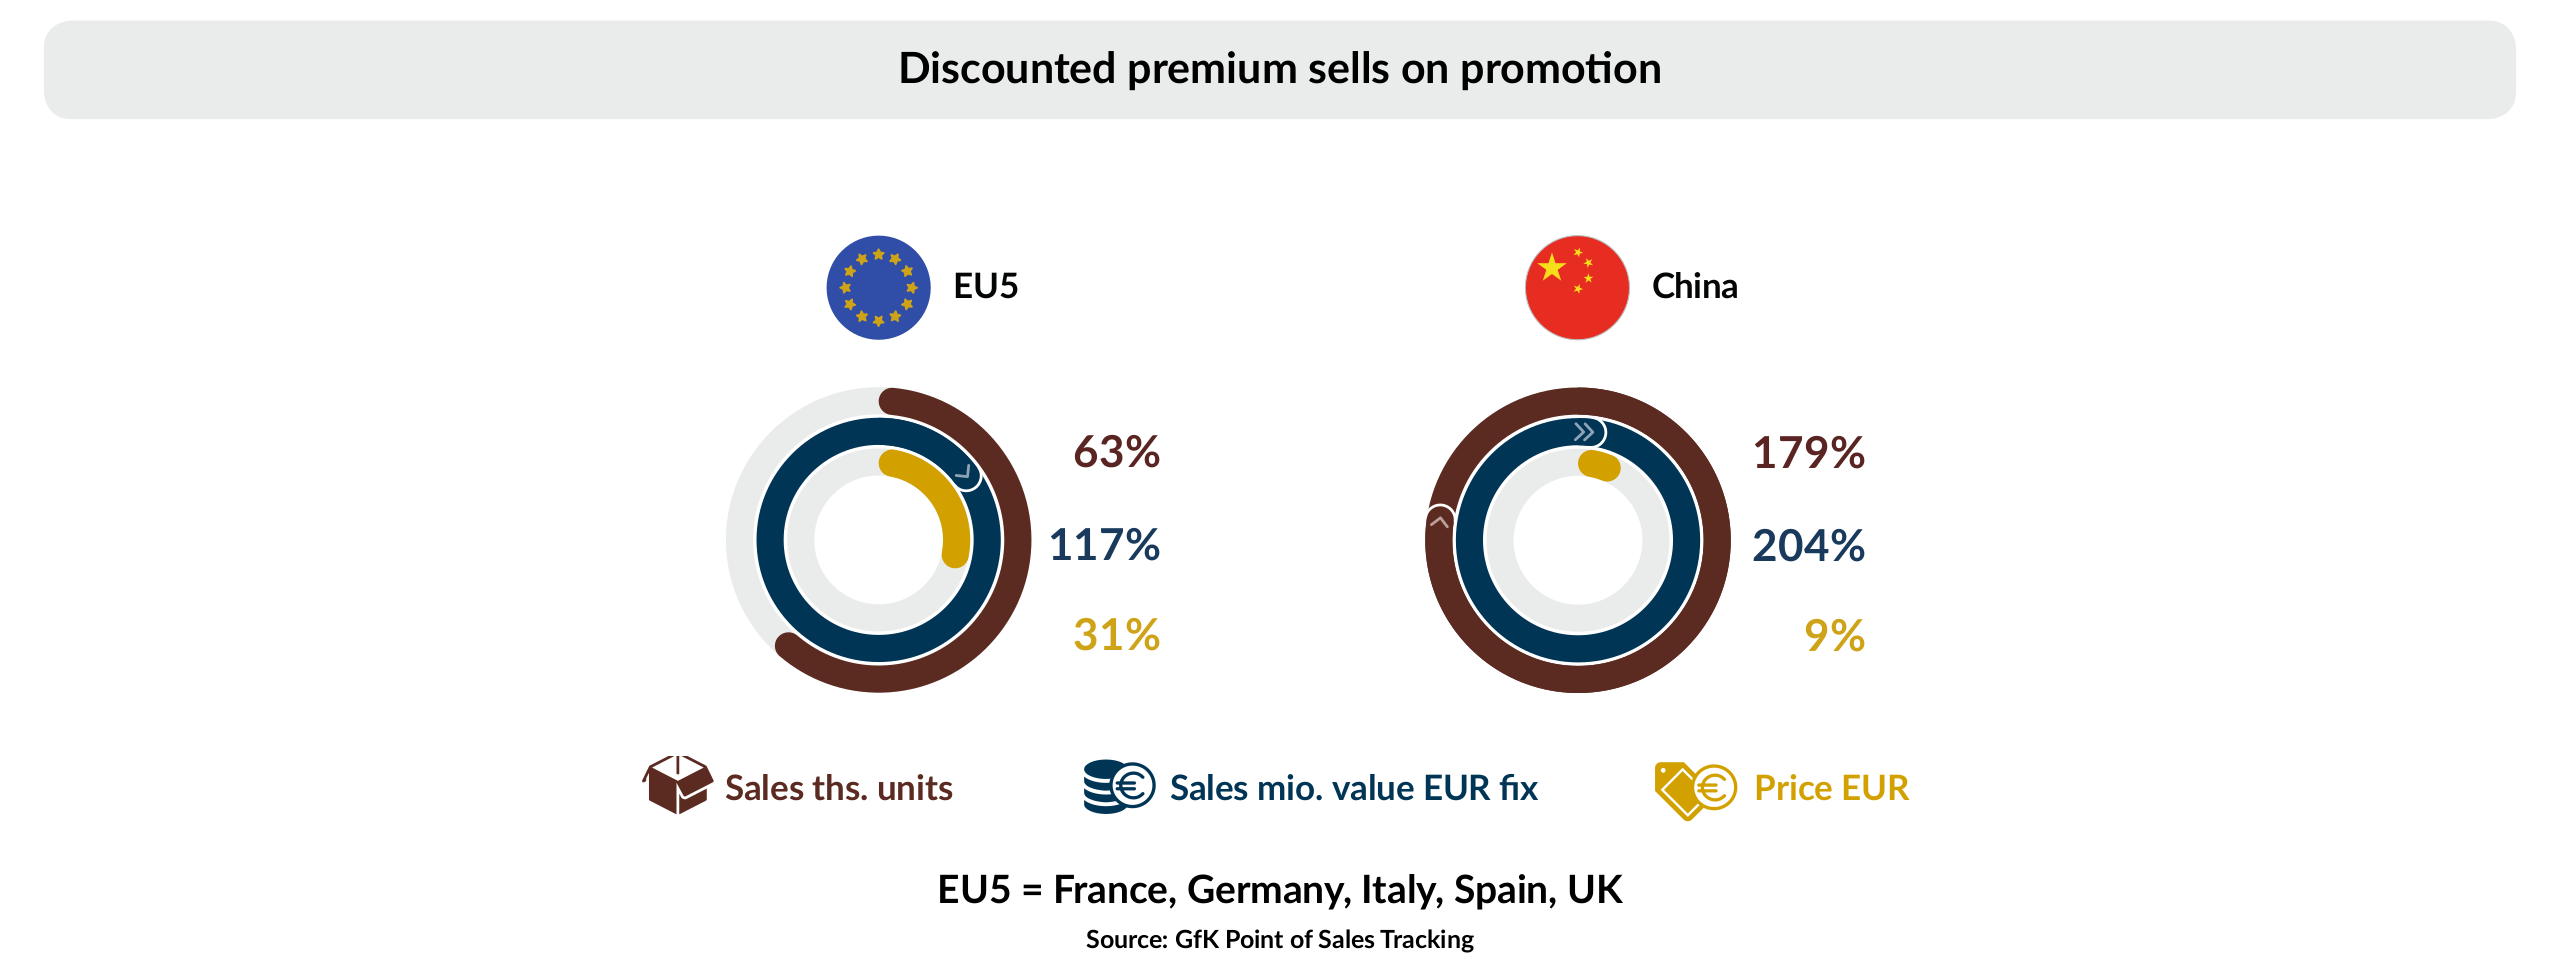 Black Friday Infography.Discounted premium sells on promotion